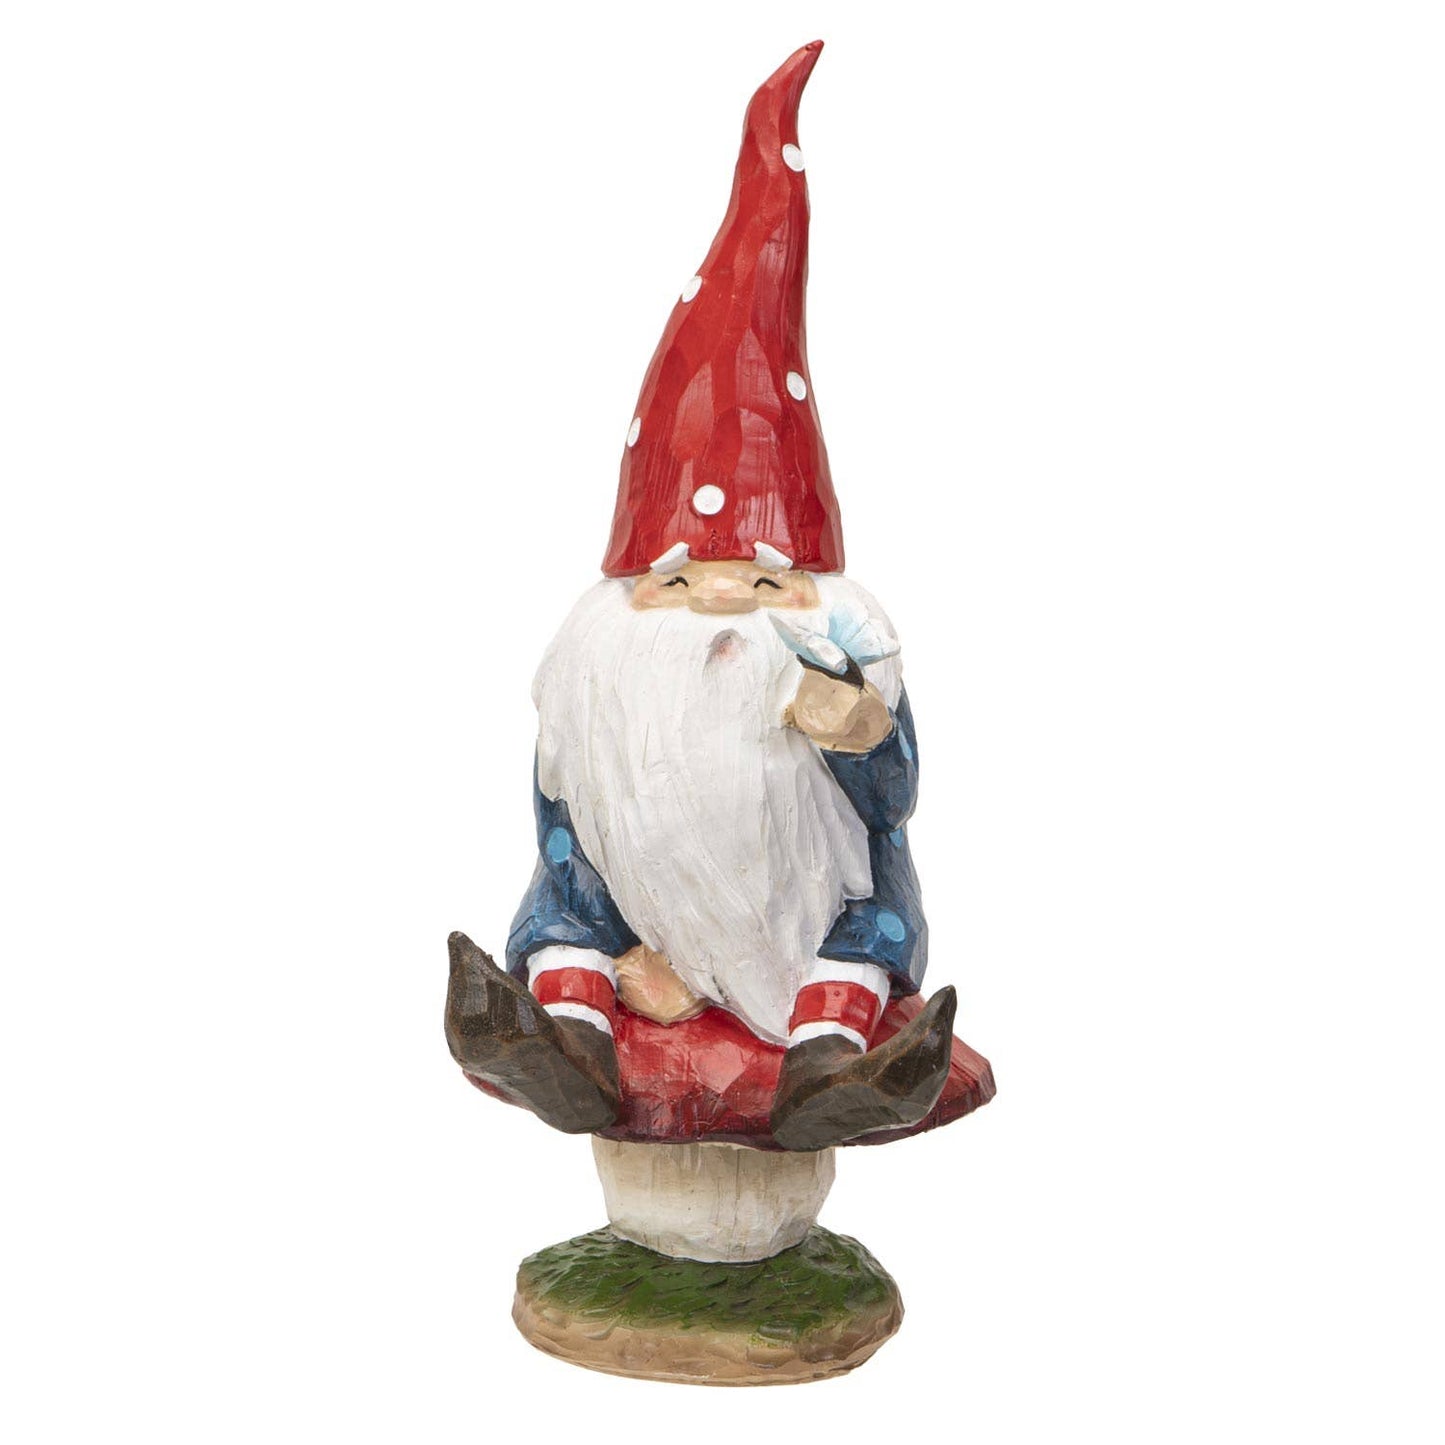 Gnome on Toadstool | Whimsical Indoor Outdoor Garden Decor | 10" Tall